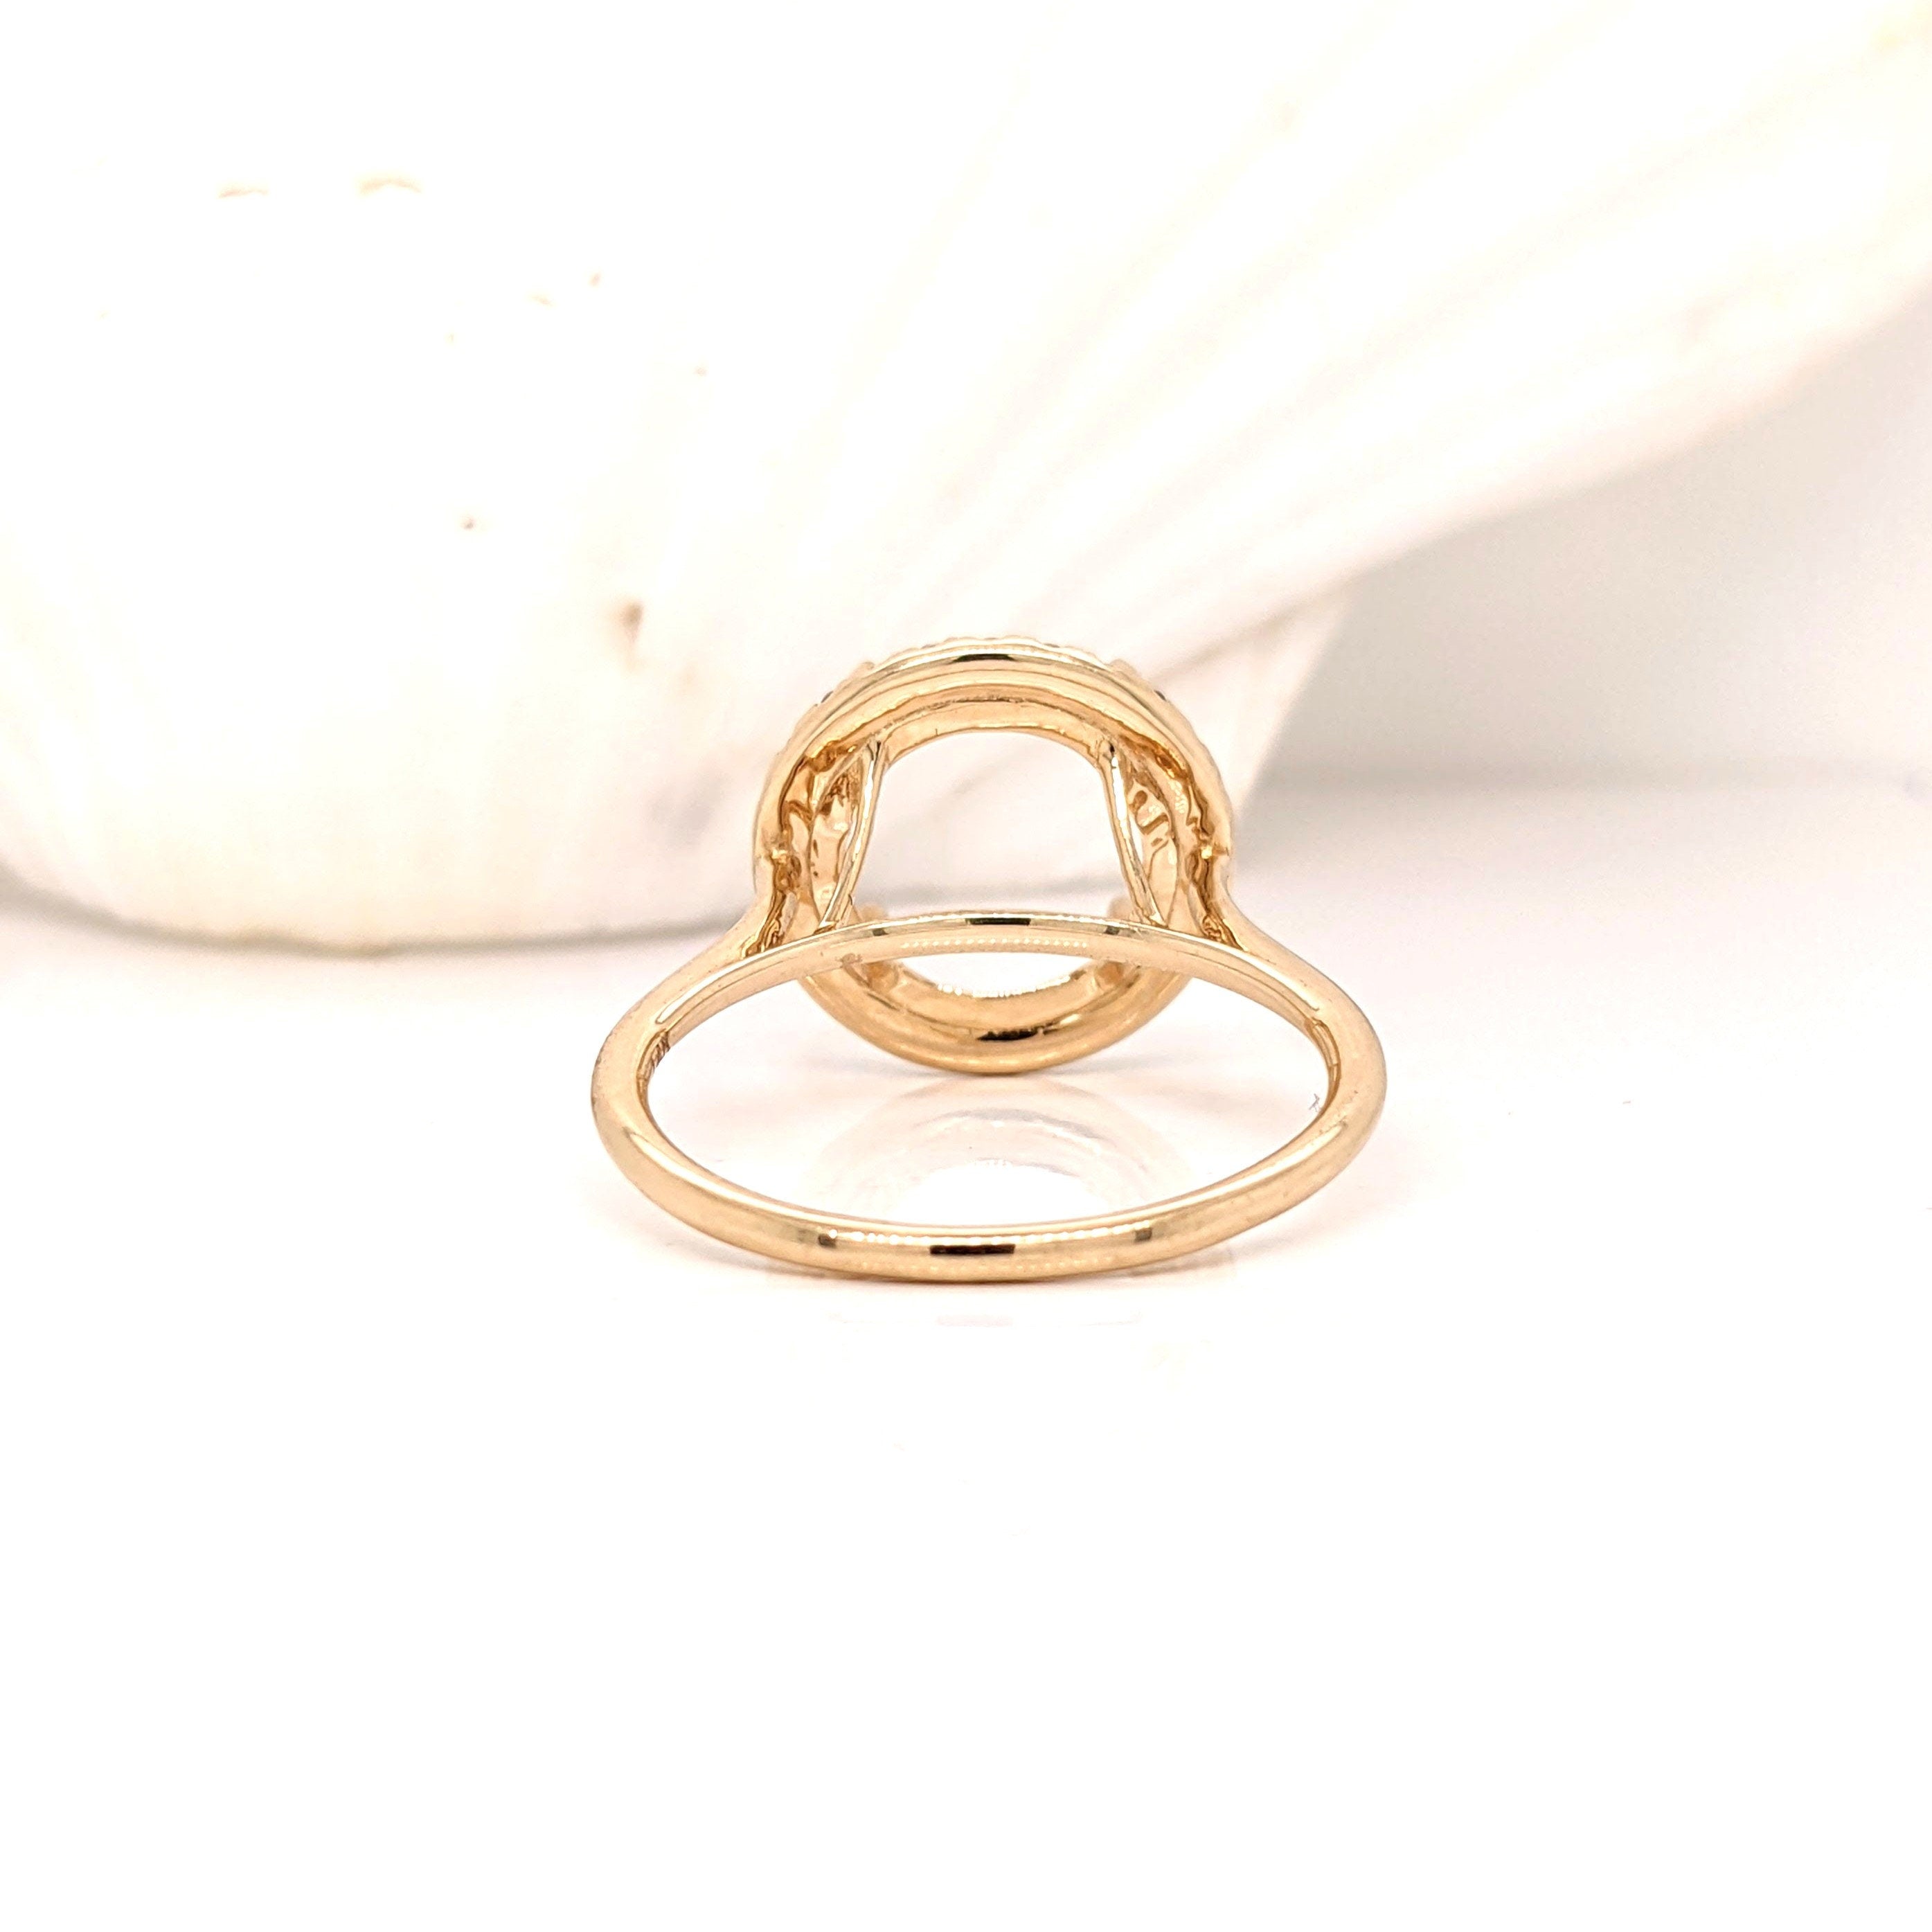 Ring Semi Mount in Solid 14k White, Yellow or Rose Gold w Round Diamond Accents | Round Prong Setting | Custom Sizes | Gemstone Setting